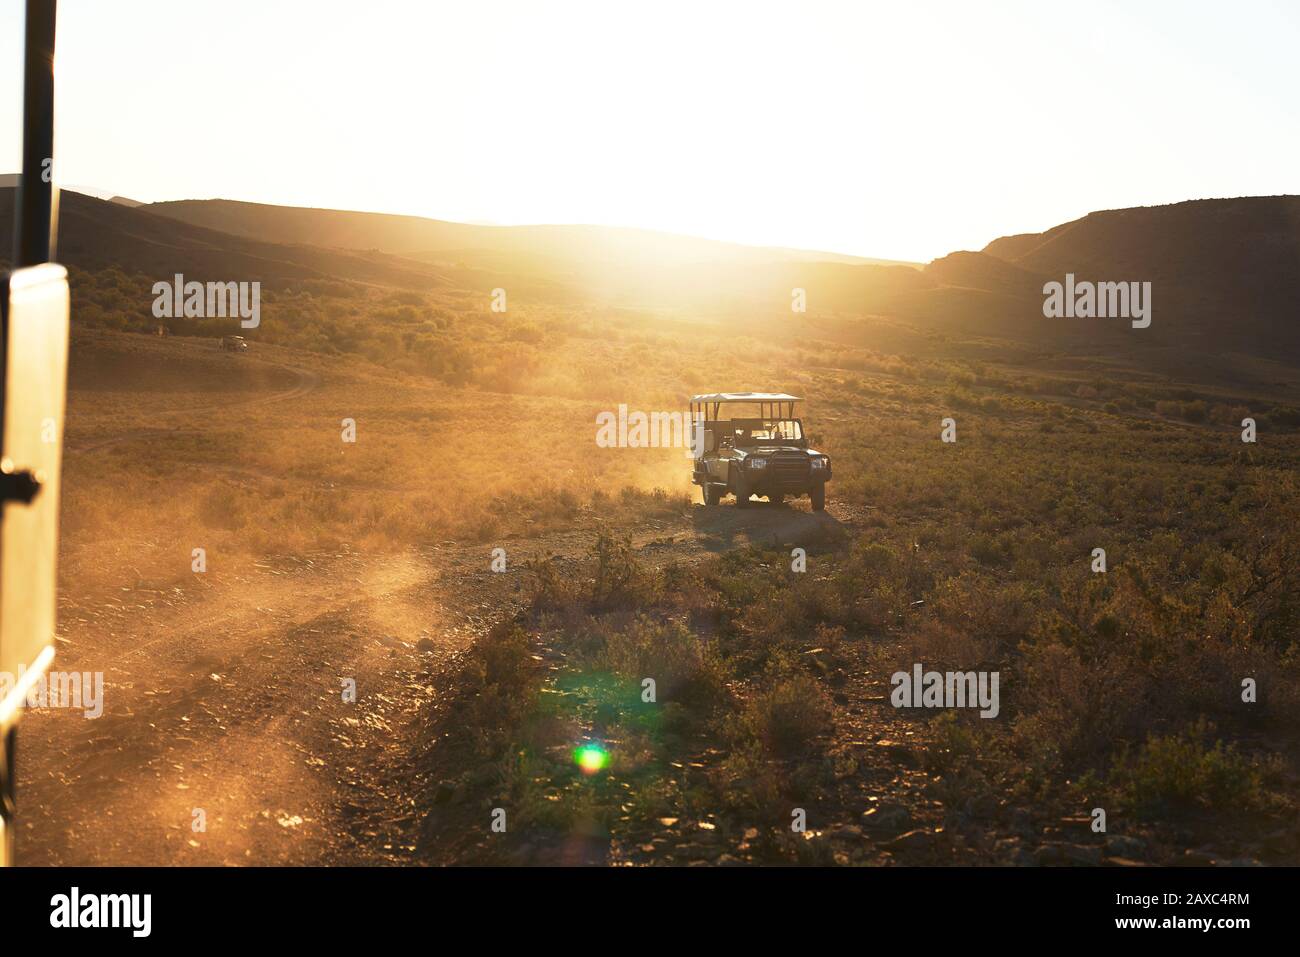 Safari off-road vehicle driving on sunny dirt road South Africa Stock Photo